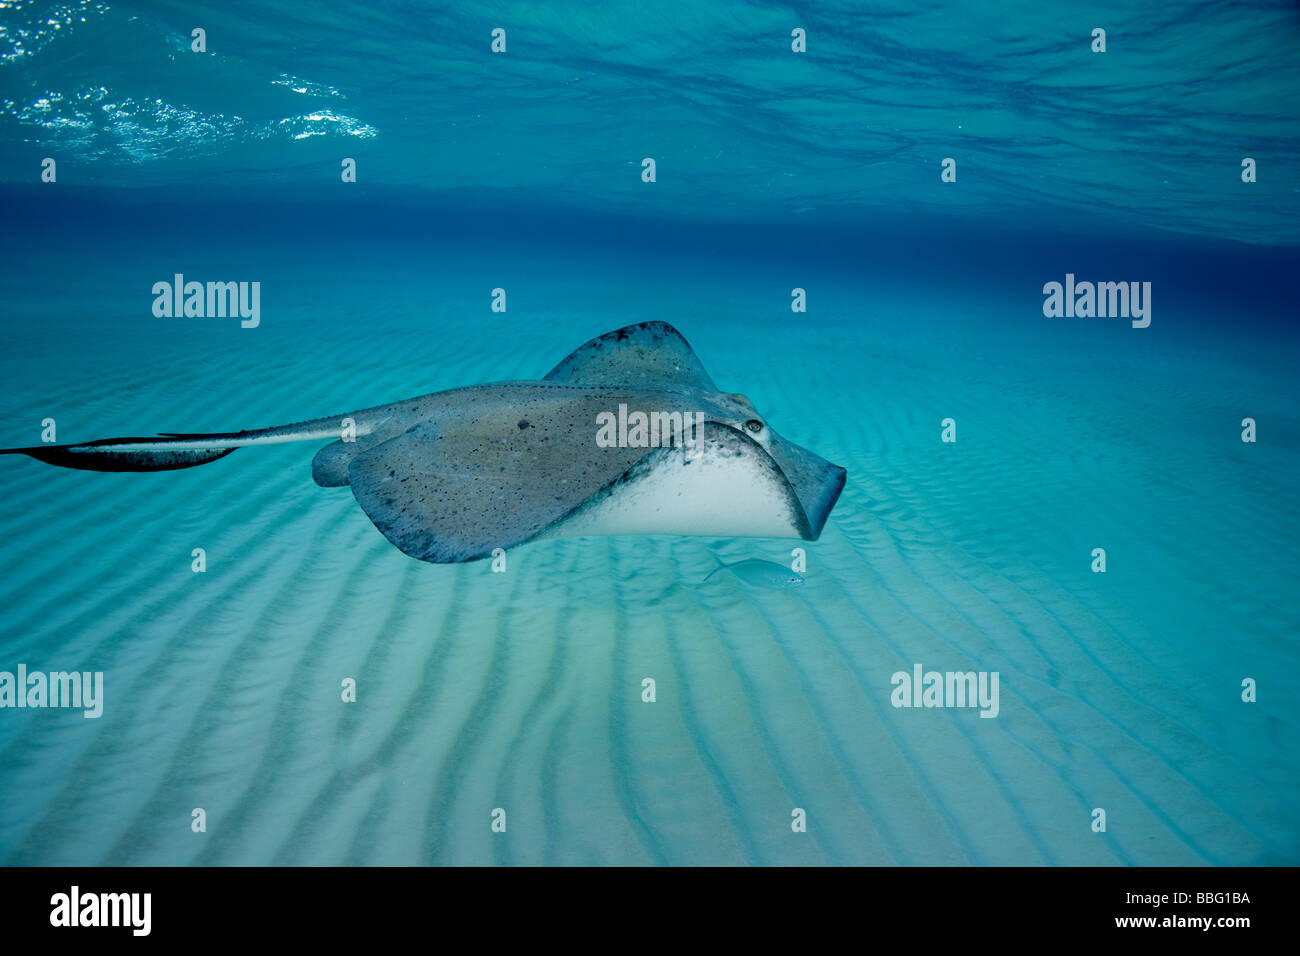 Southern stingray in motion. Stock Photo